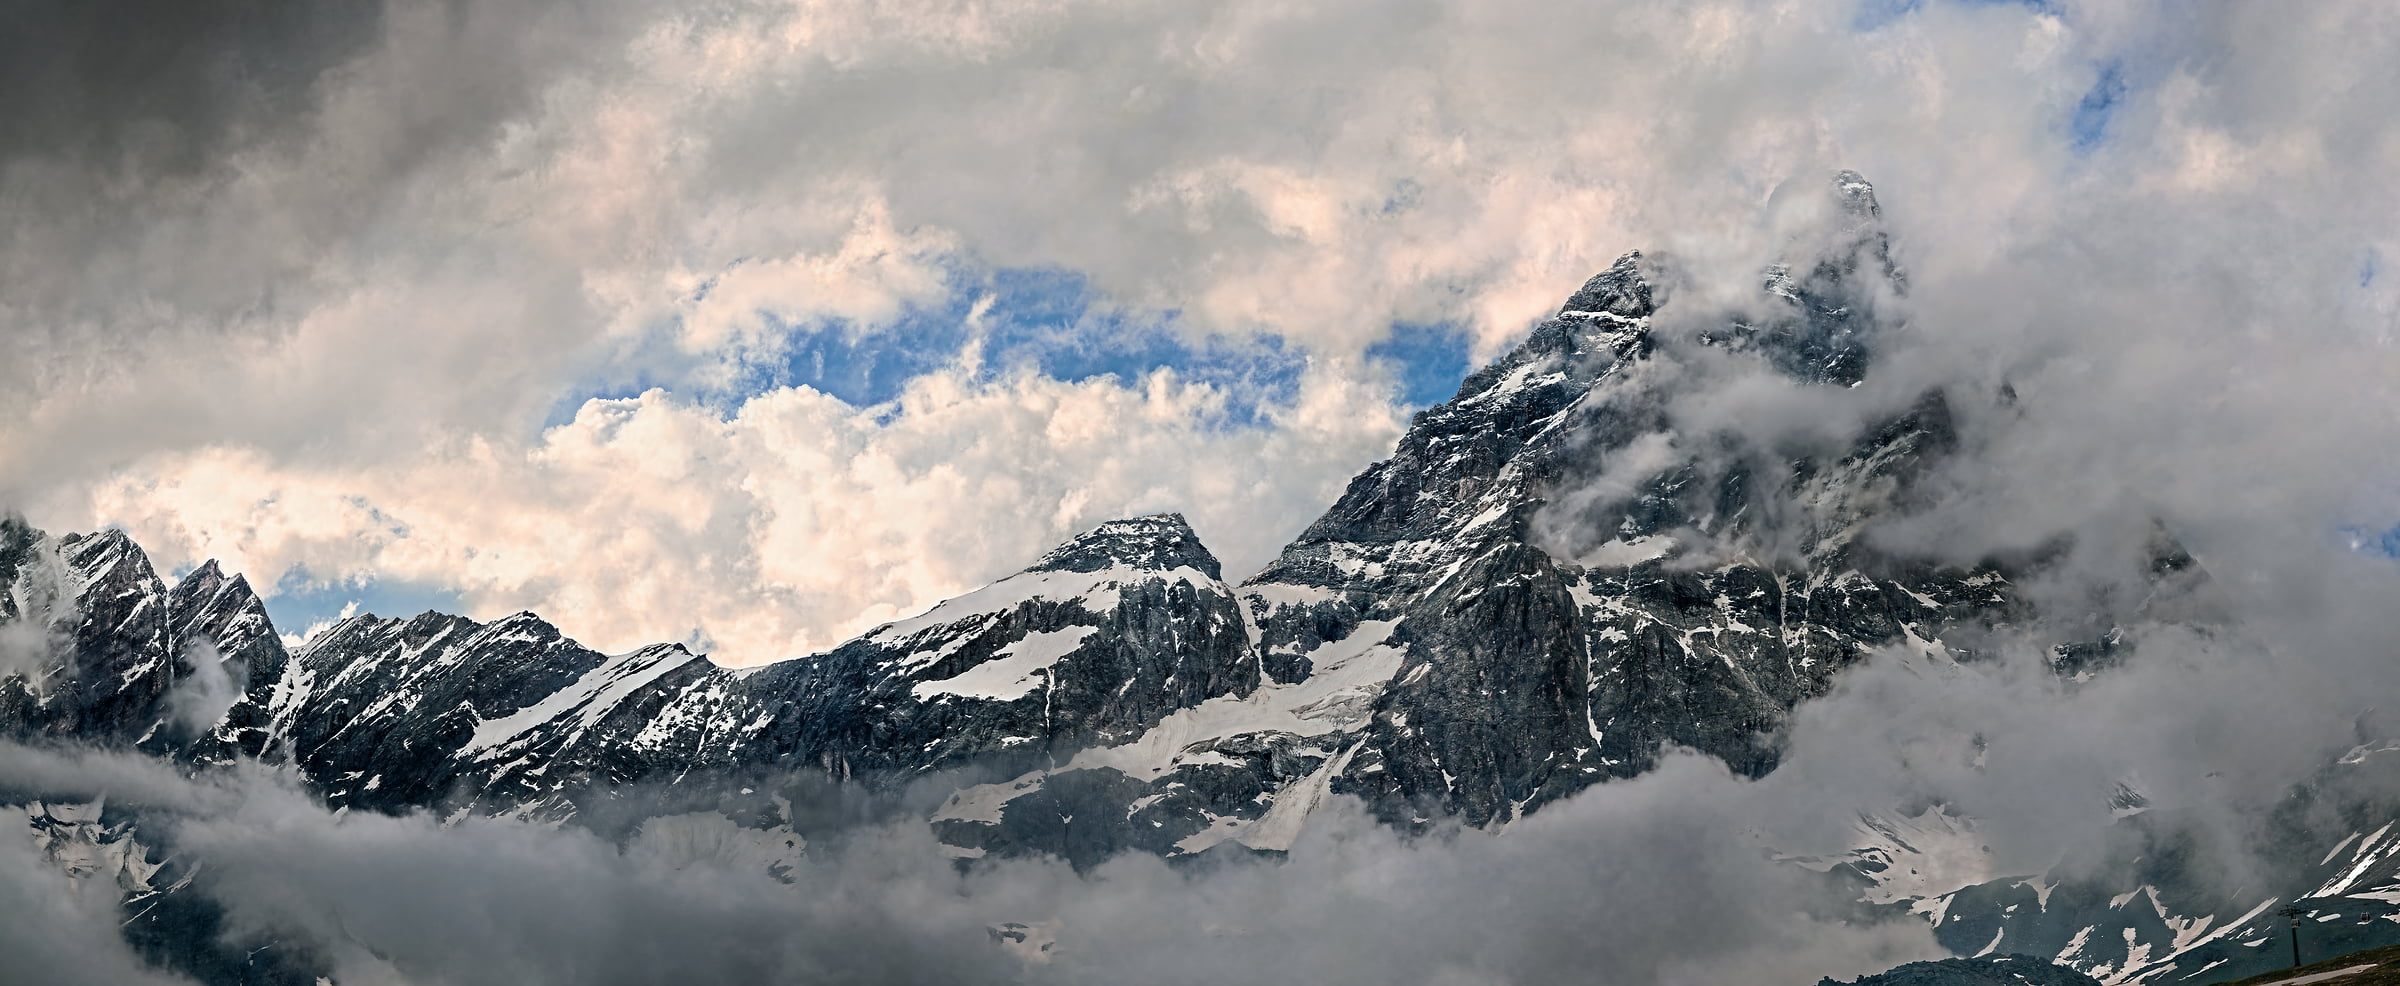 2,277 megapixels! A very high resolution, large-format VAST photo print of the Matterhorn; mountain landscape photograph created by Duilio Fiorille in Valtournenche, Italy